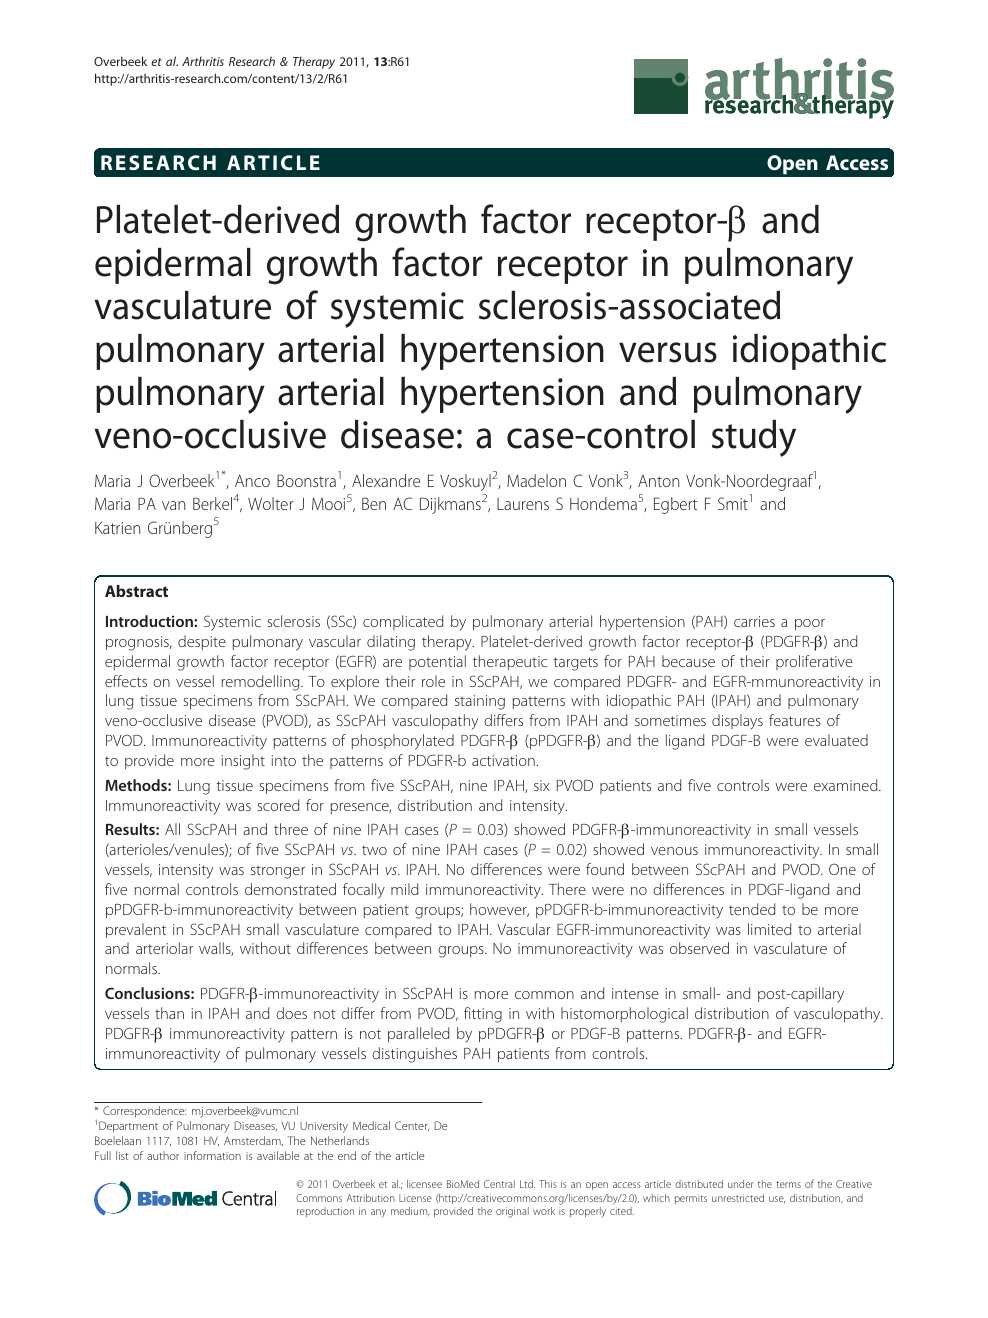 Platelet Derived Growth Factor Receptor B And Epidermal Growth Factor Receptor In Pulmonary Vasculature Of Systemic Sclerosis Associated Pulmonary Arterial Hypertension Versus Idiopathic Pulmonary Arterial Hypertension And Pulmonary Veno Occlusive